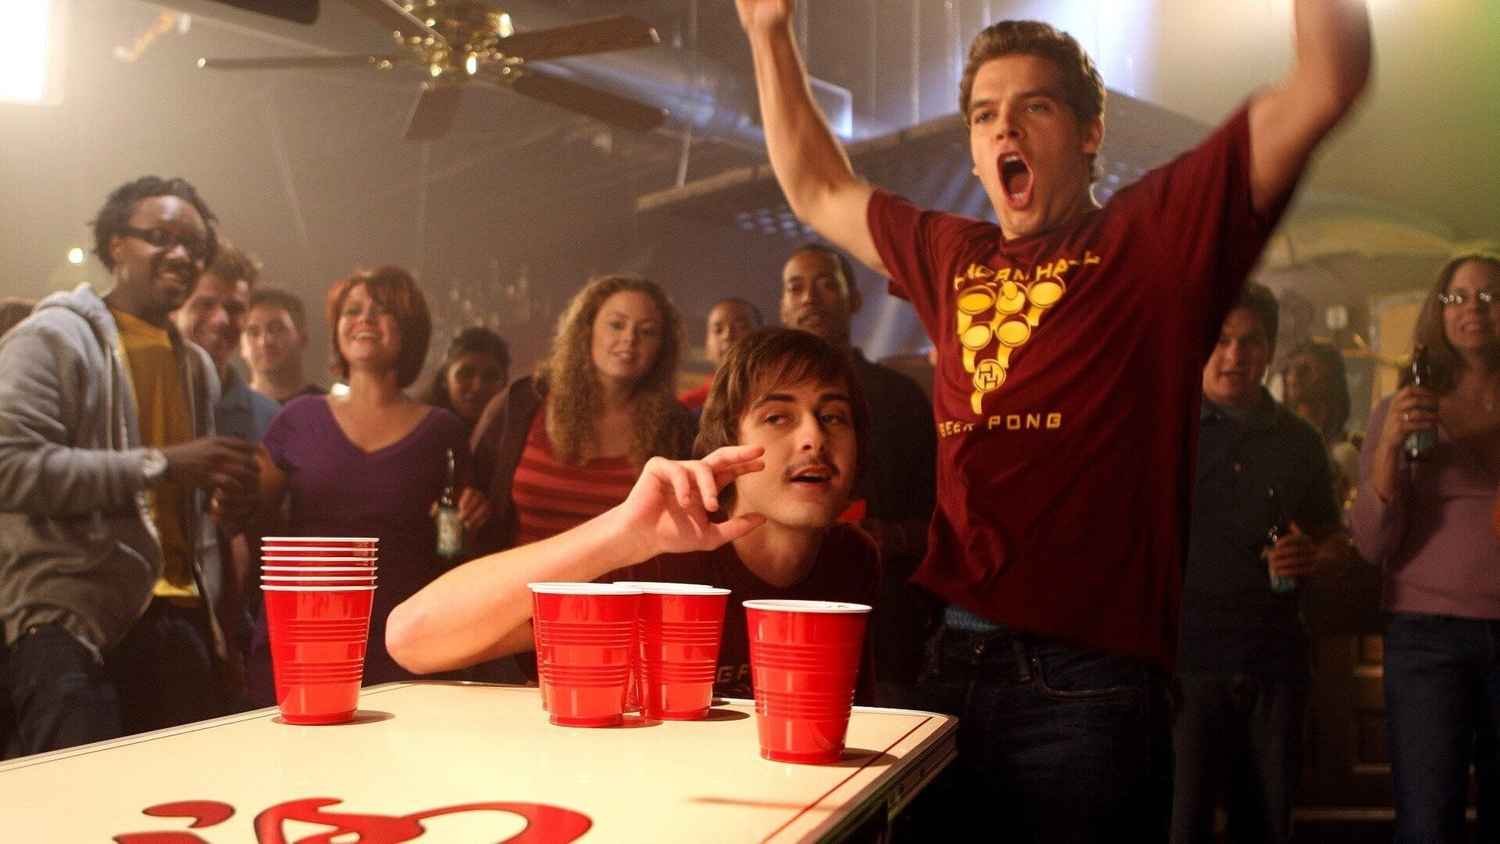 where to watch road trip beer pong